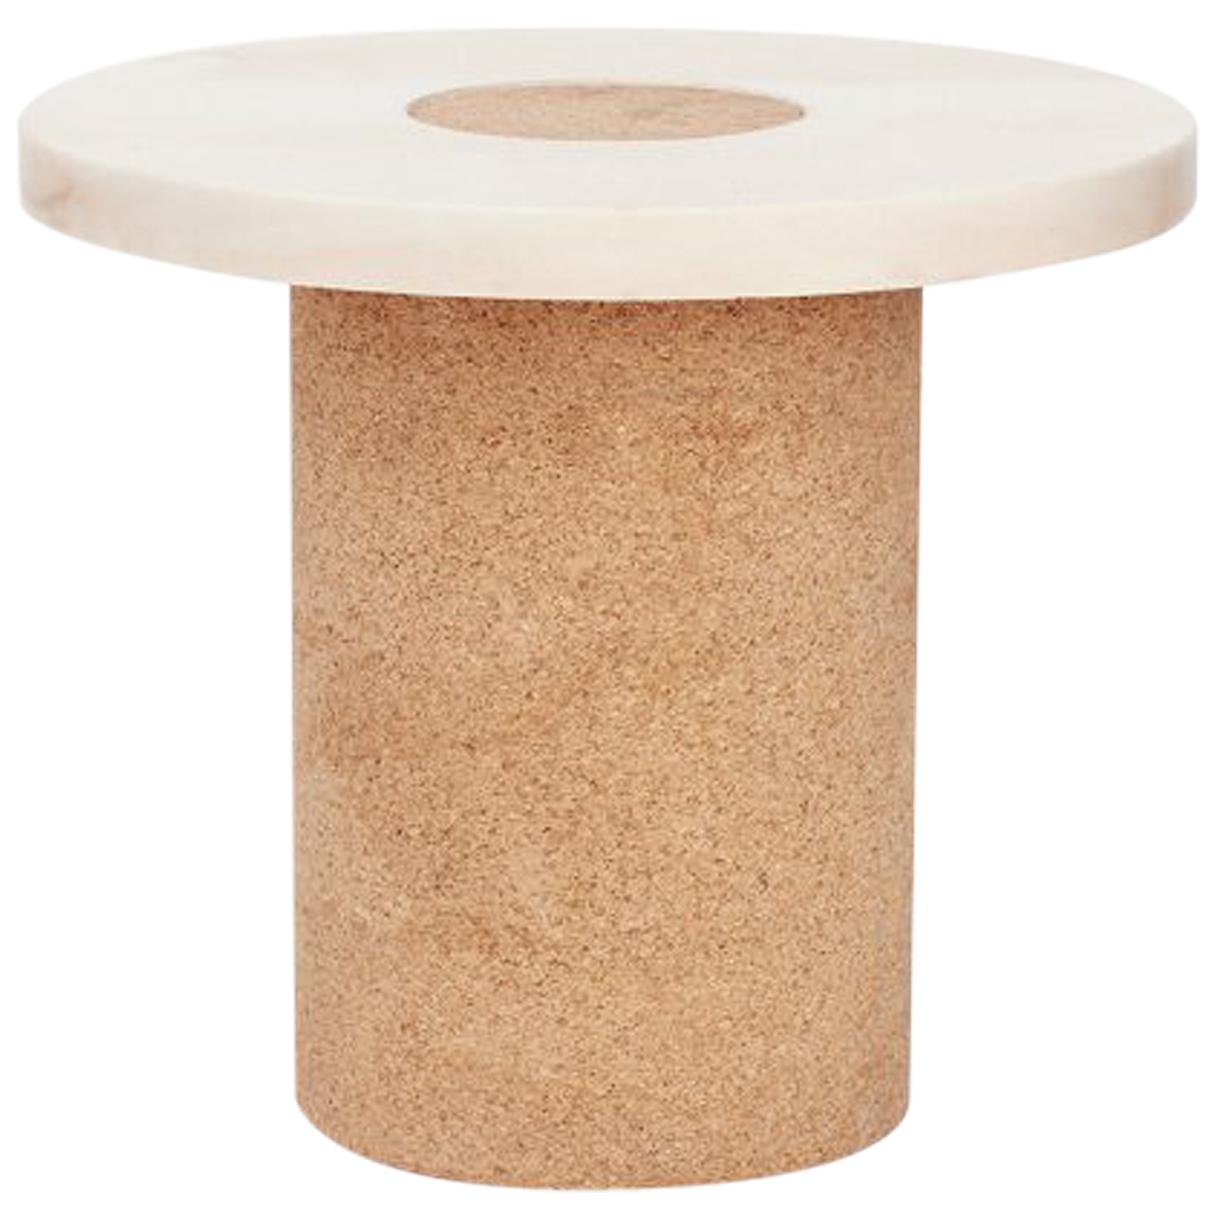 FRAMA Contemporary Sintra Table Small with White Marble and Natural Cork For Sale